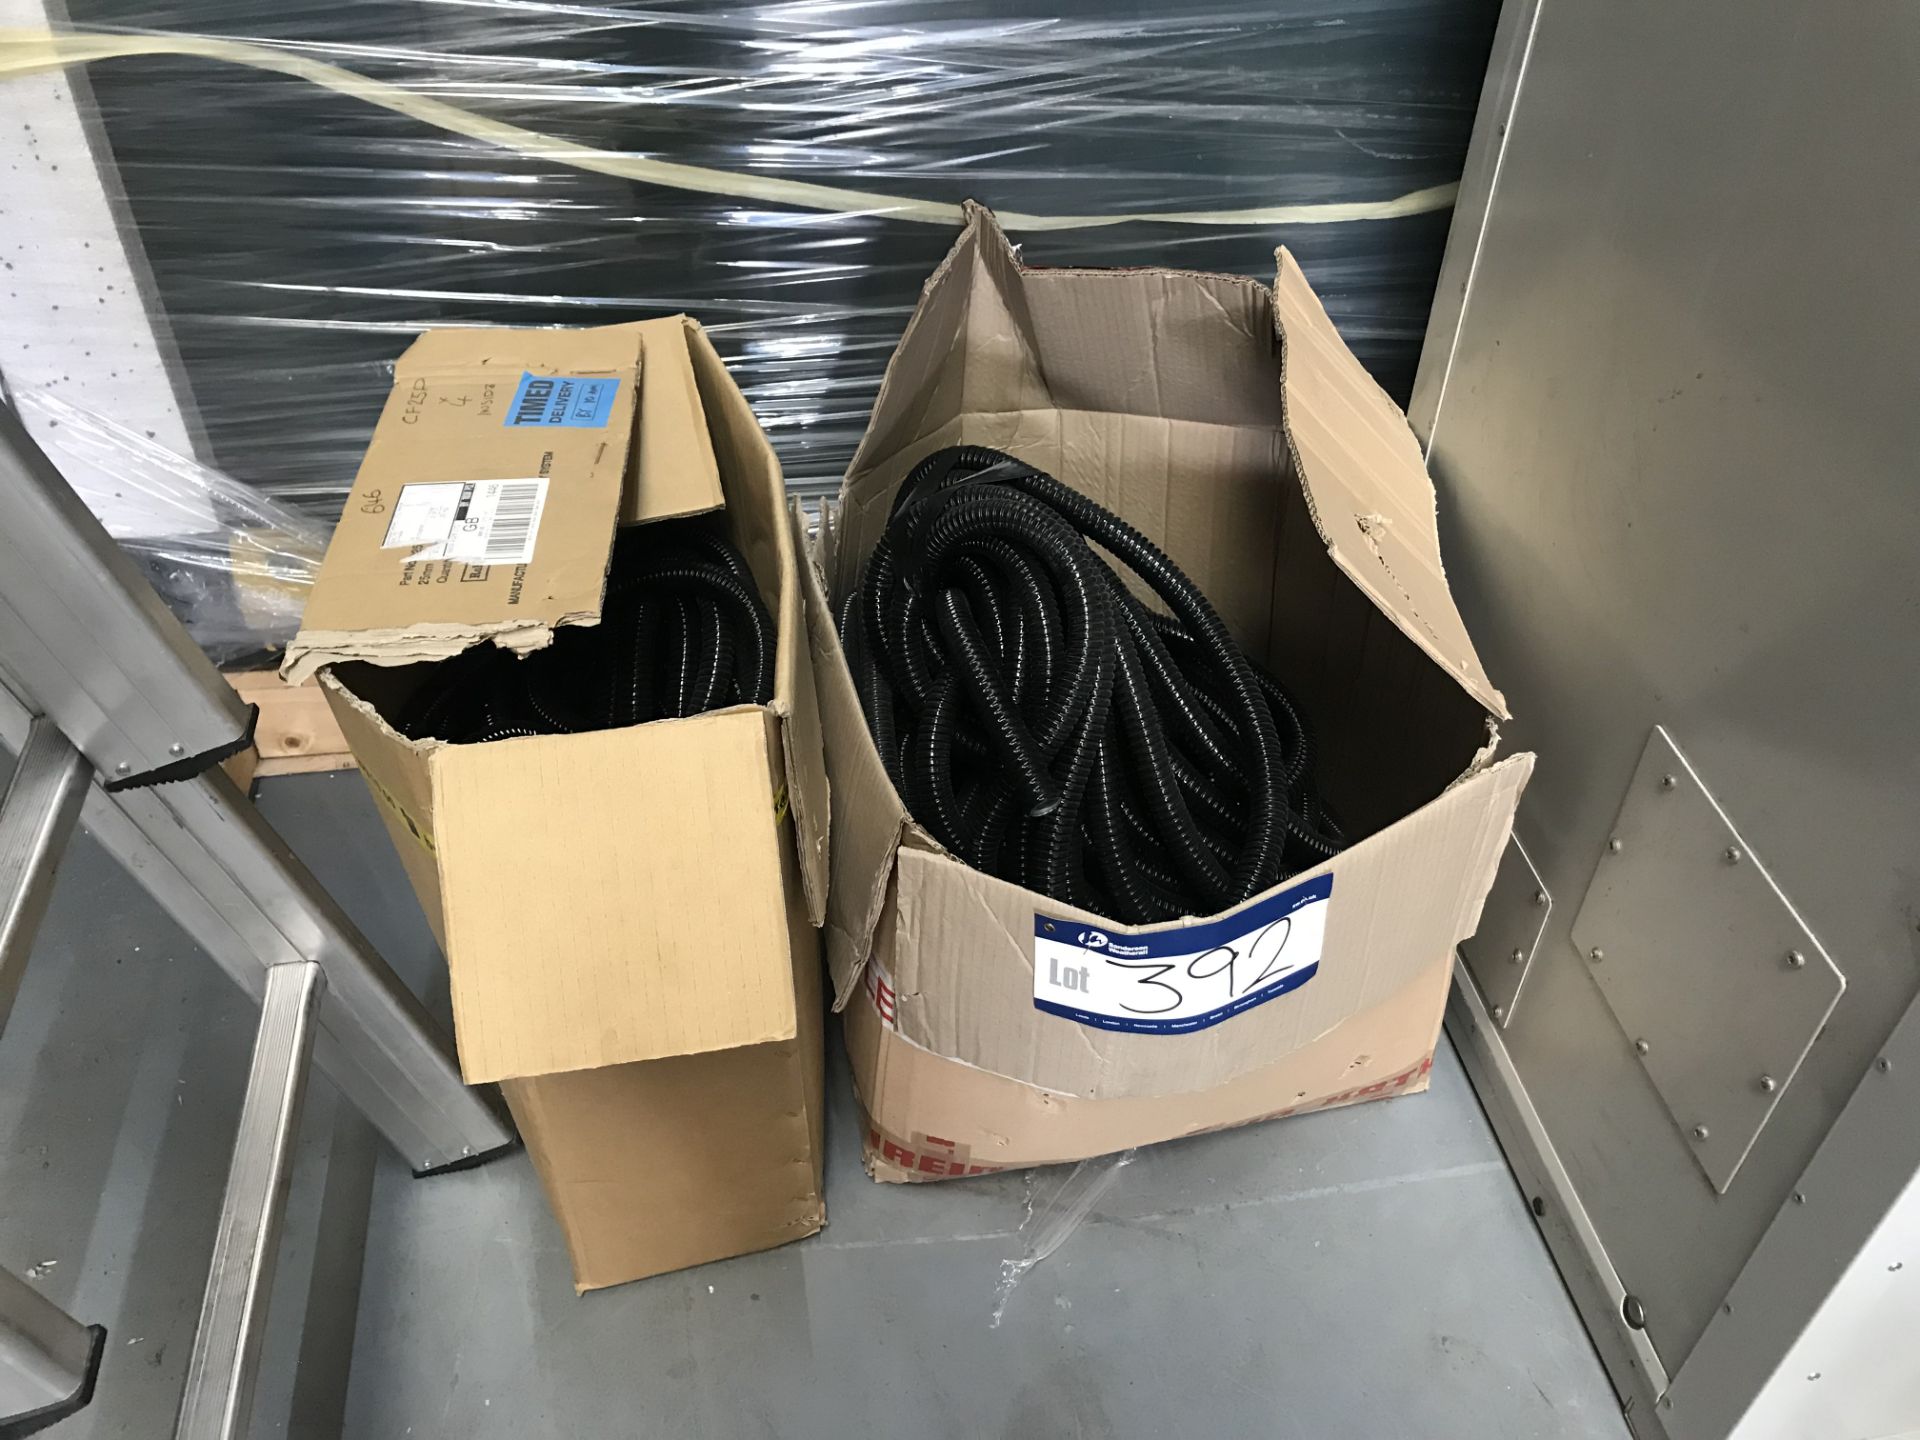 Quantity of Armoured Flexible Conduit in 2 boxes